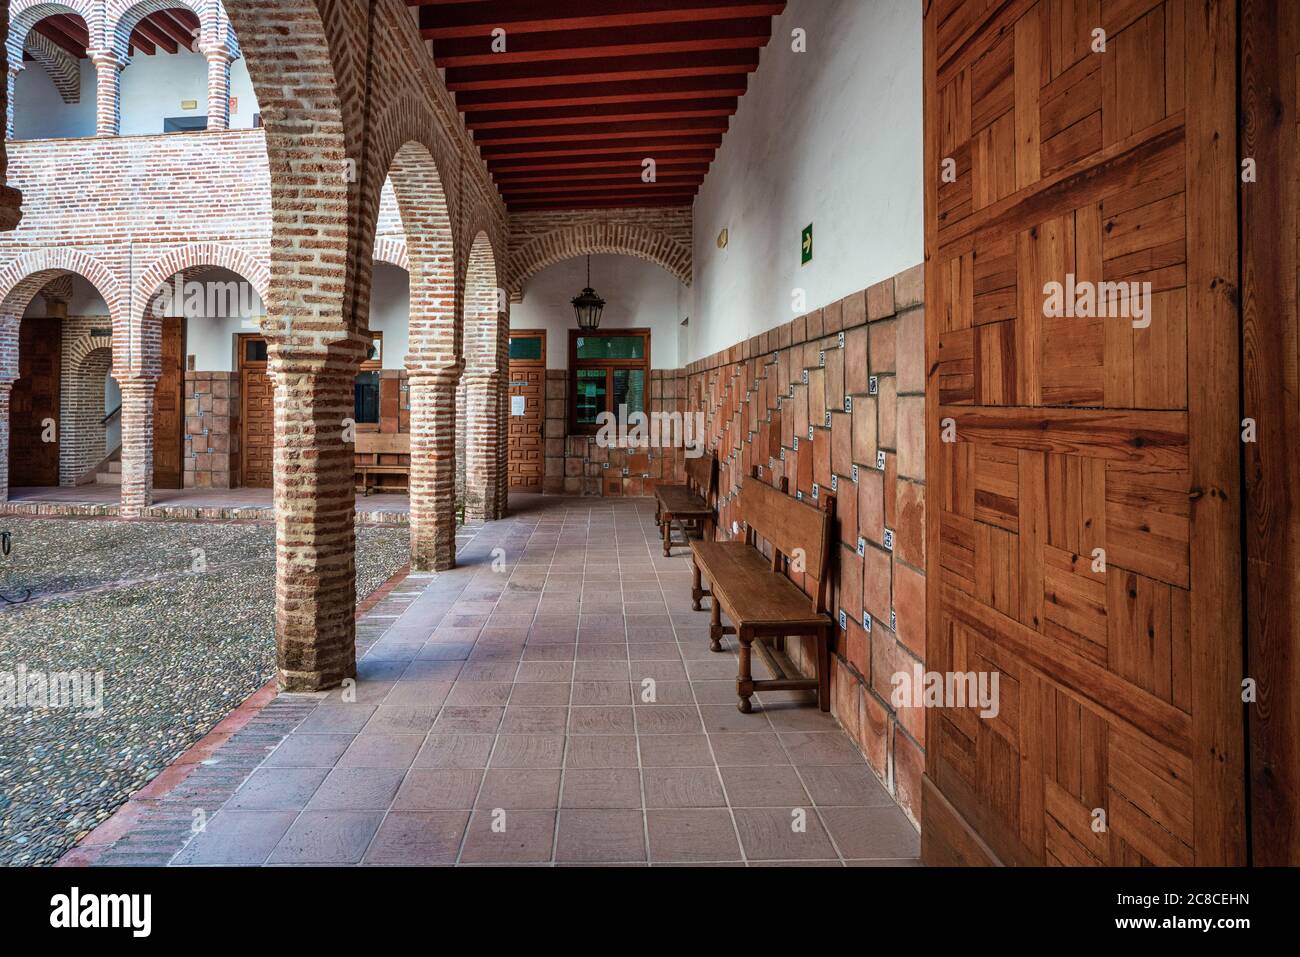 Palace of the Zapata in Llerena, Extremadura in Spain Stock Photo